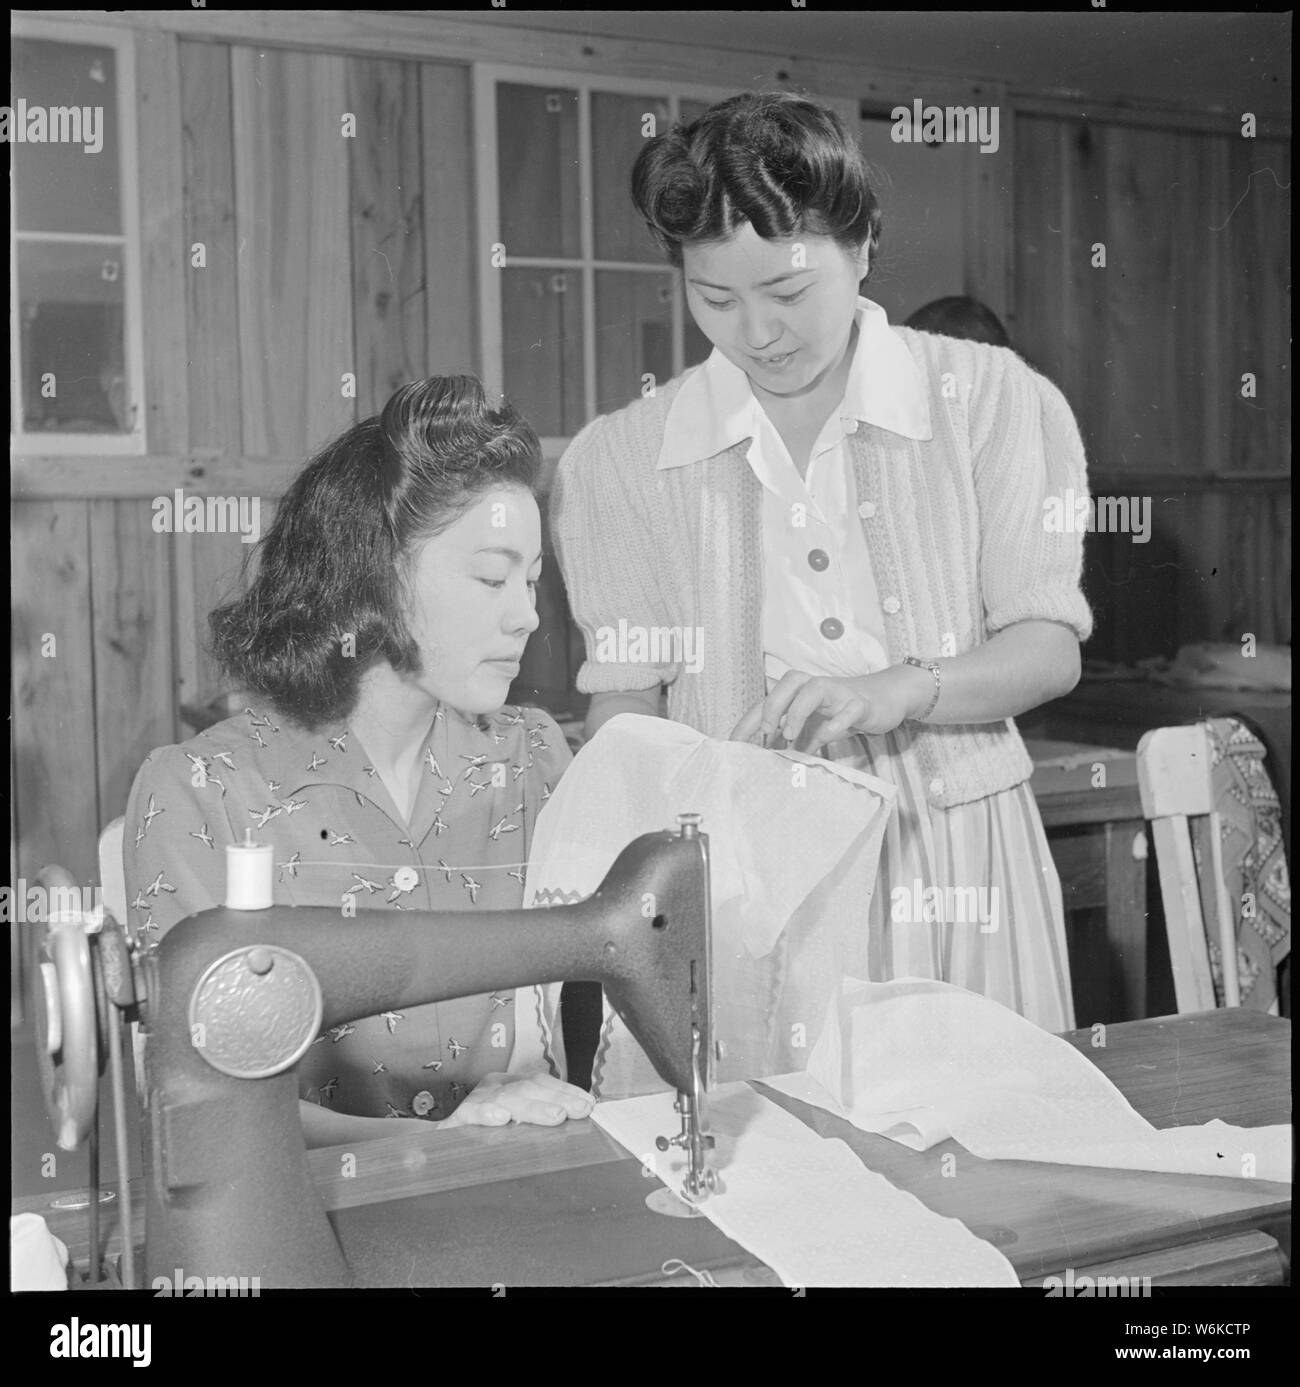 Rohwer Relocation Center, McGehee, Arkansas. In a sewing class at the Rohwer Center schools, Misaye . . .; Scope and content:  The full caption for this photograph reads: Rohwer Relocation Center, McGehee, Arkansas. In a sewing class at the Rohwer Center schools, Misaye Oku gets pointers from istructress, Mrs. Sadako Yasue. Adult classes, teaching subjects which contribute to the comforts or living requirements of center life, are very popular with house-wives and mothers. Stock Photo